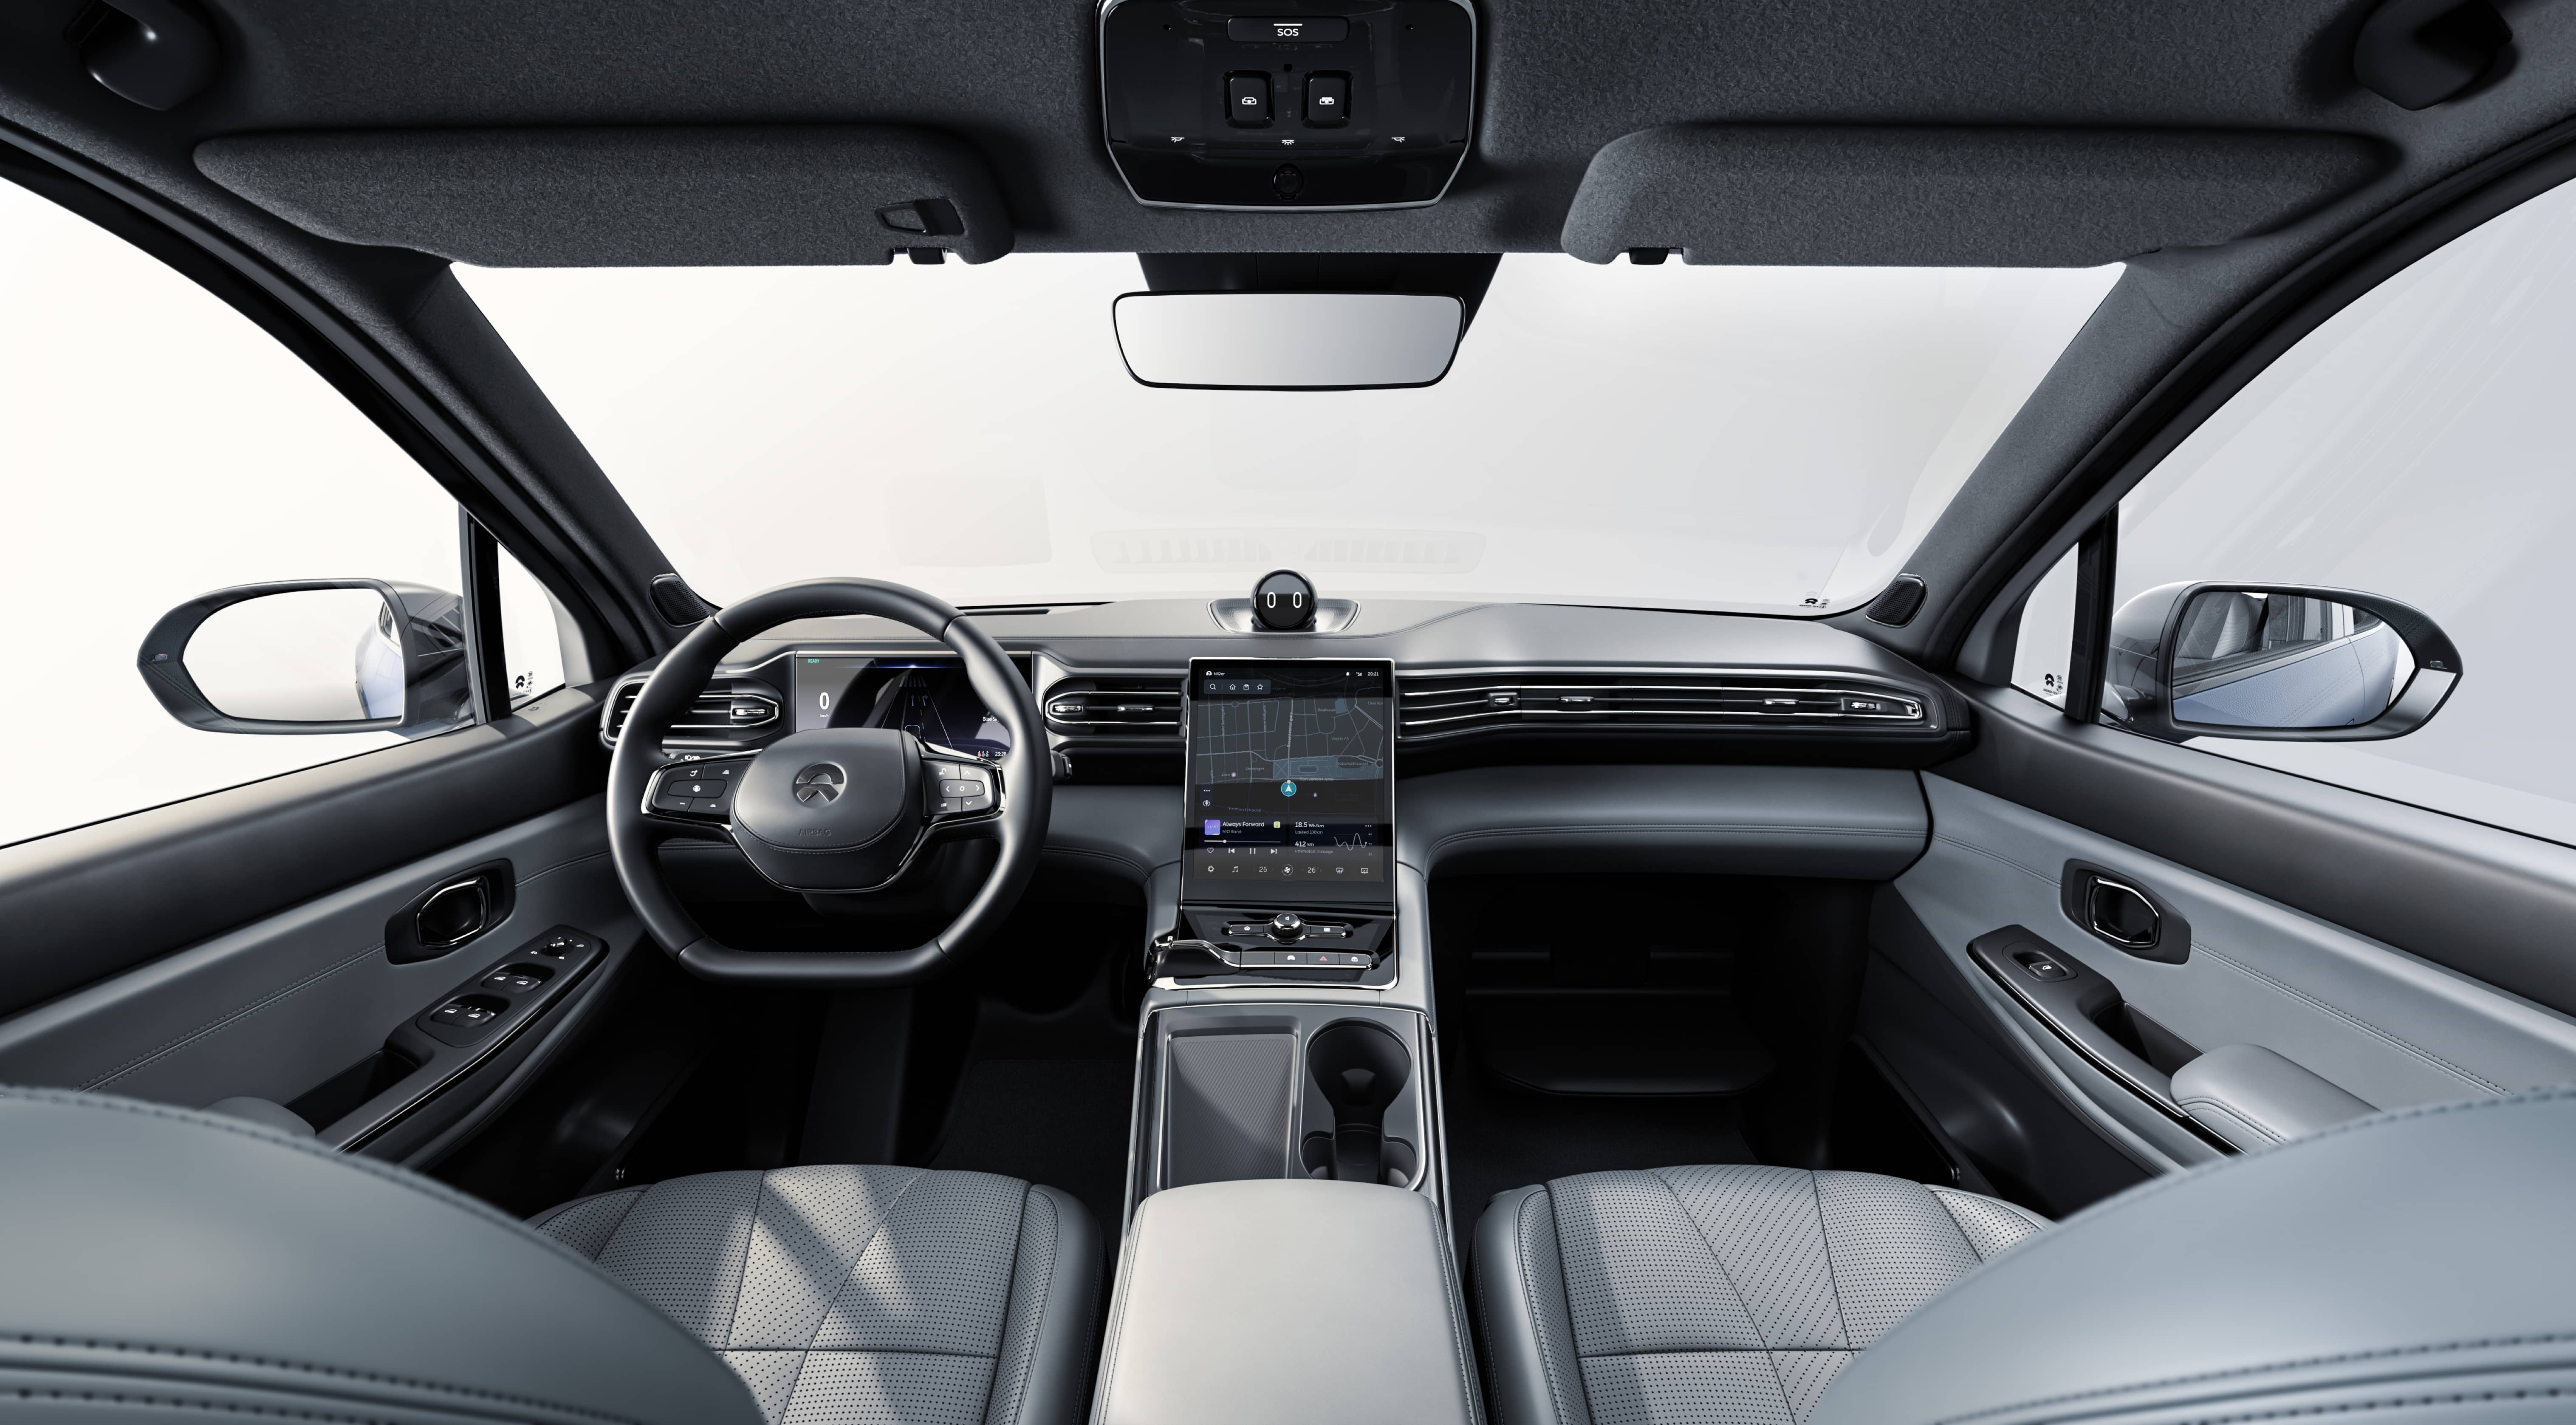 The digital cockpit that understands you-NIO ES8 - Beyond Expectations